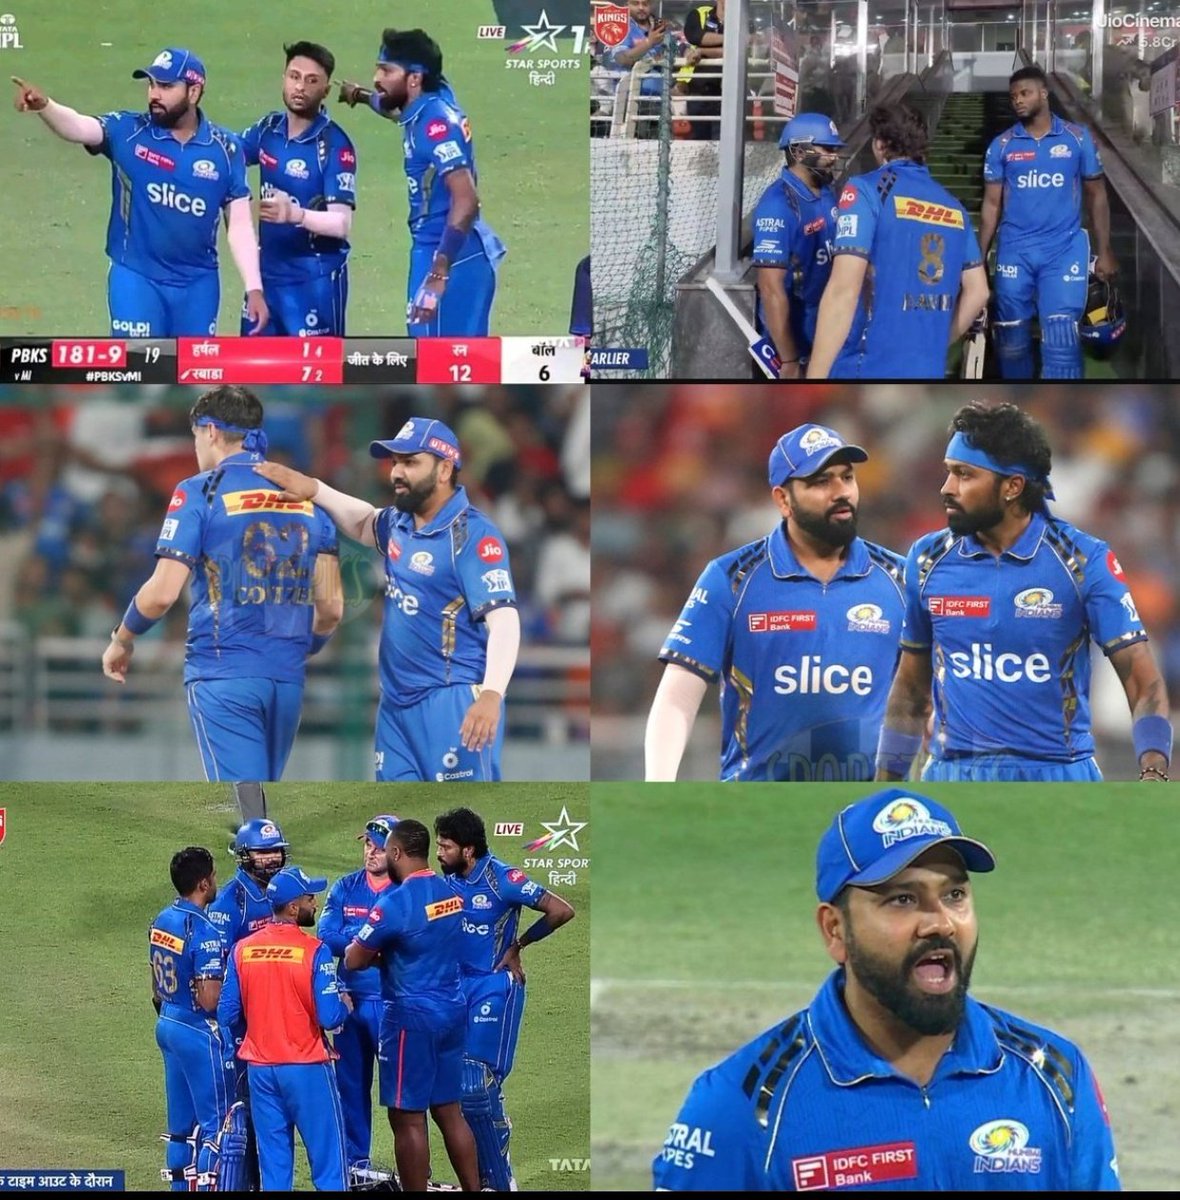 Rohit Sharma DO makes groups in the team ....

But Only Because Your Captain Doesn't Know How To Handle The Boys!

#RohitSharma 
#PBKSvsMI